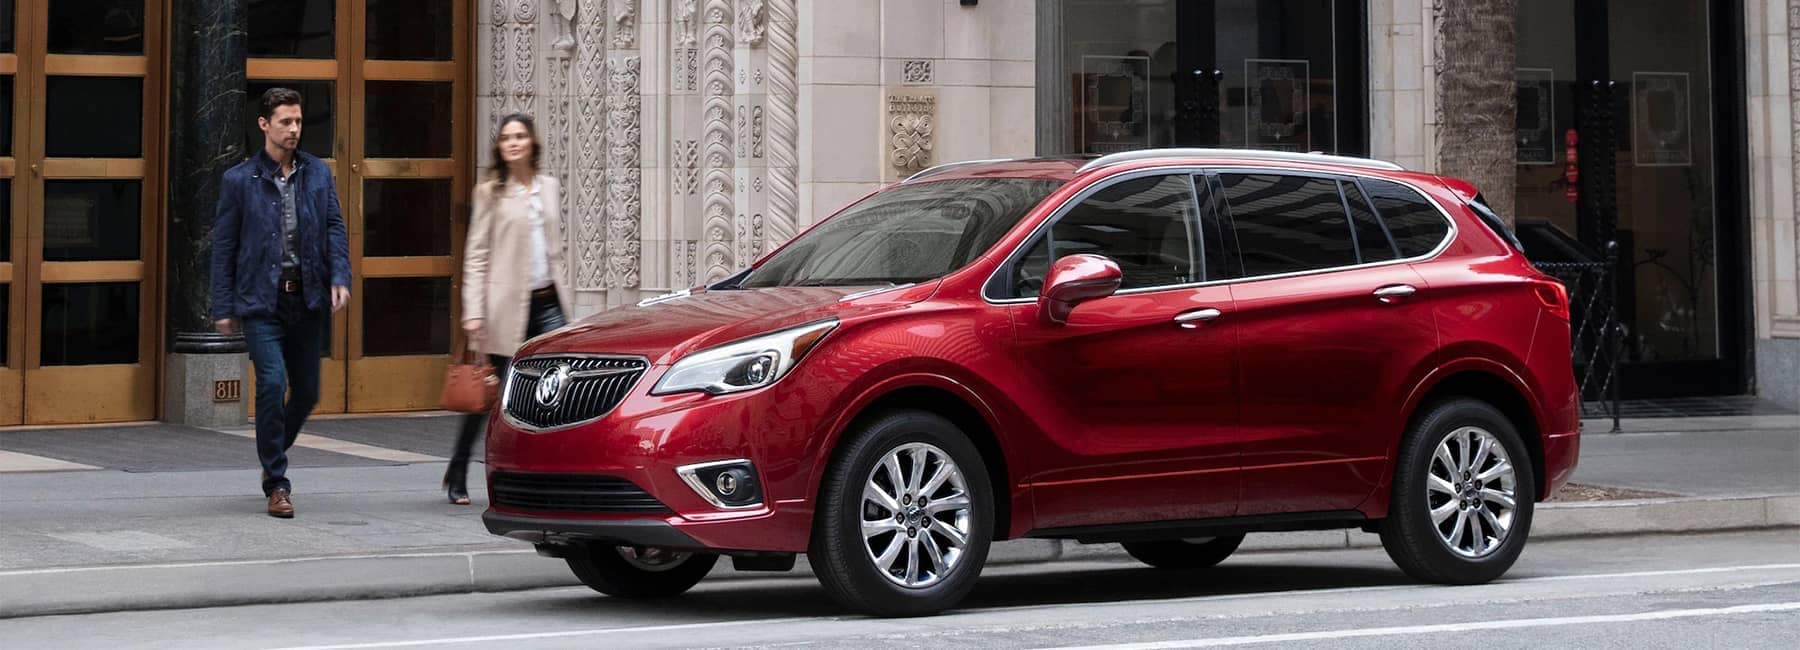 2020-Buick-Envision-Compact-SUV-with-Man-and-Woman-Walking